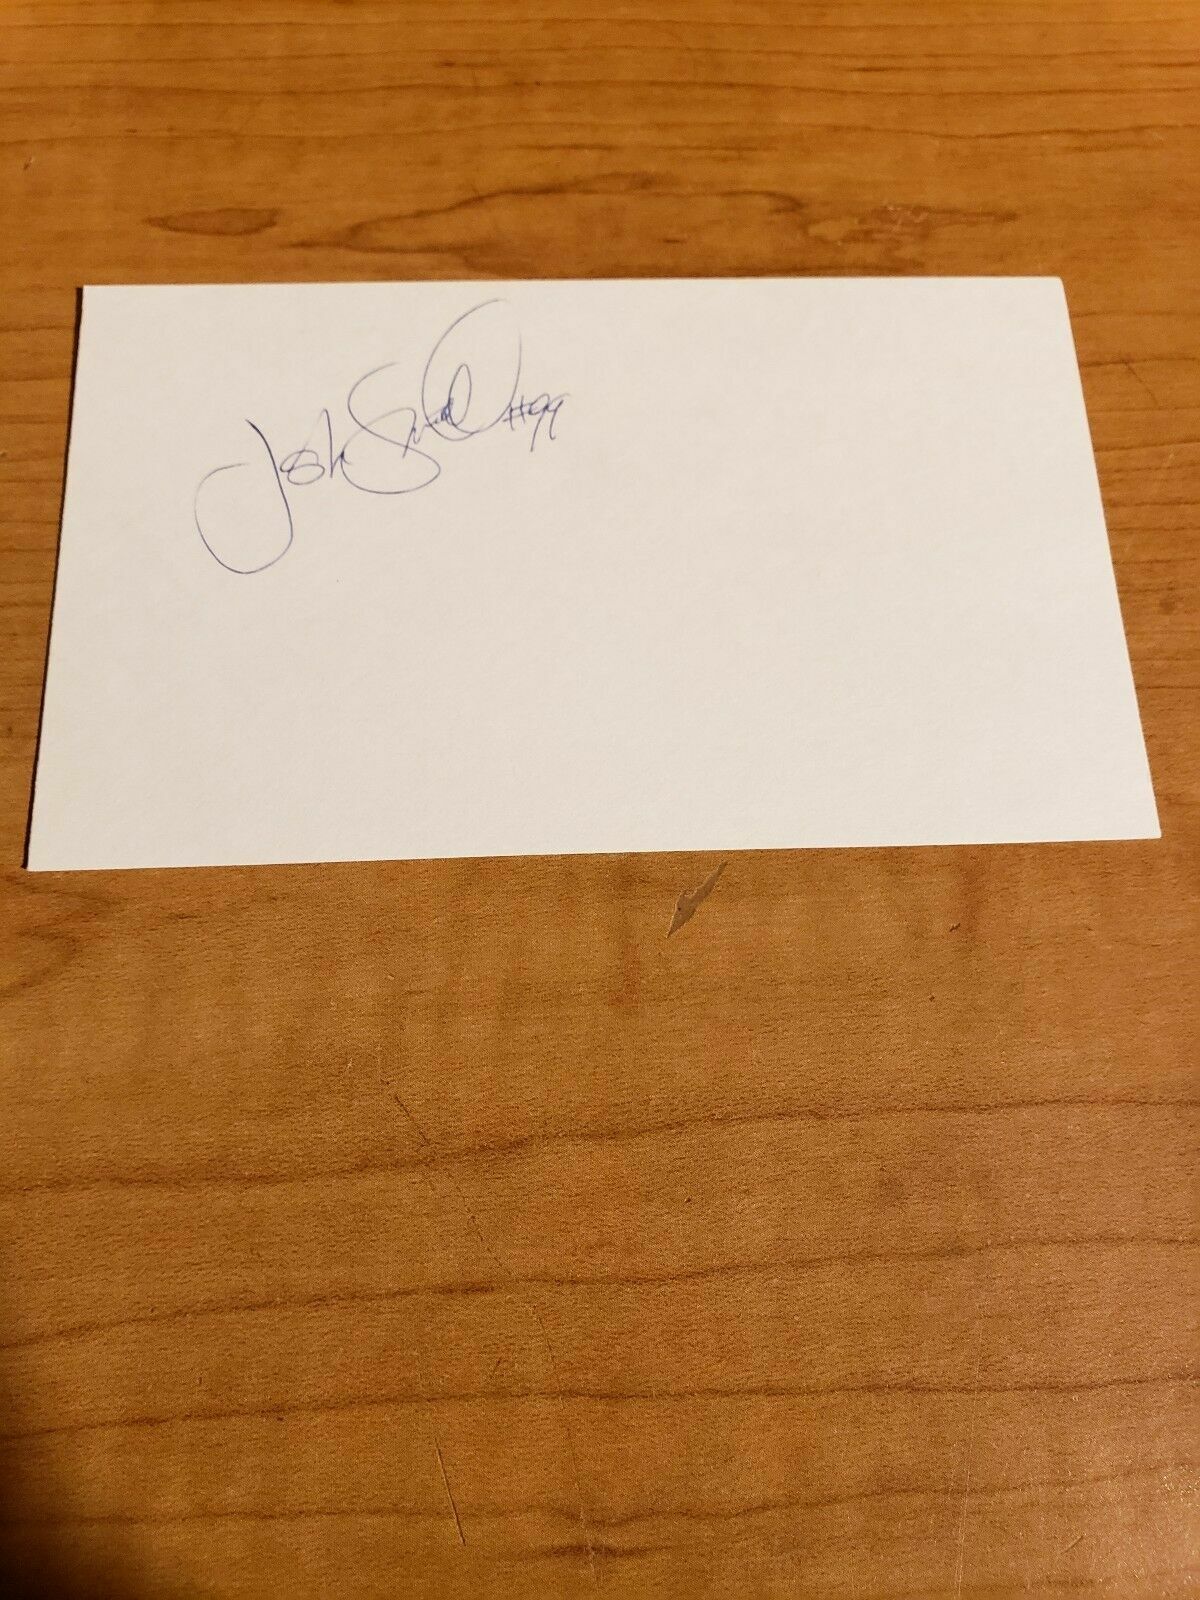 JOSH SMITH - FOOTBALL - AUTHENTIC AUTOGRAPH SIGNED INDEX CARD - A6825